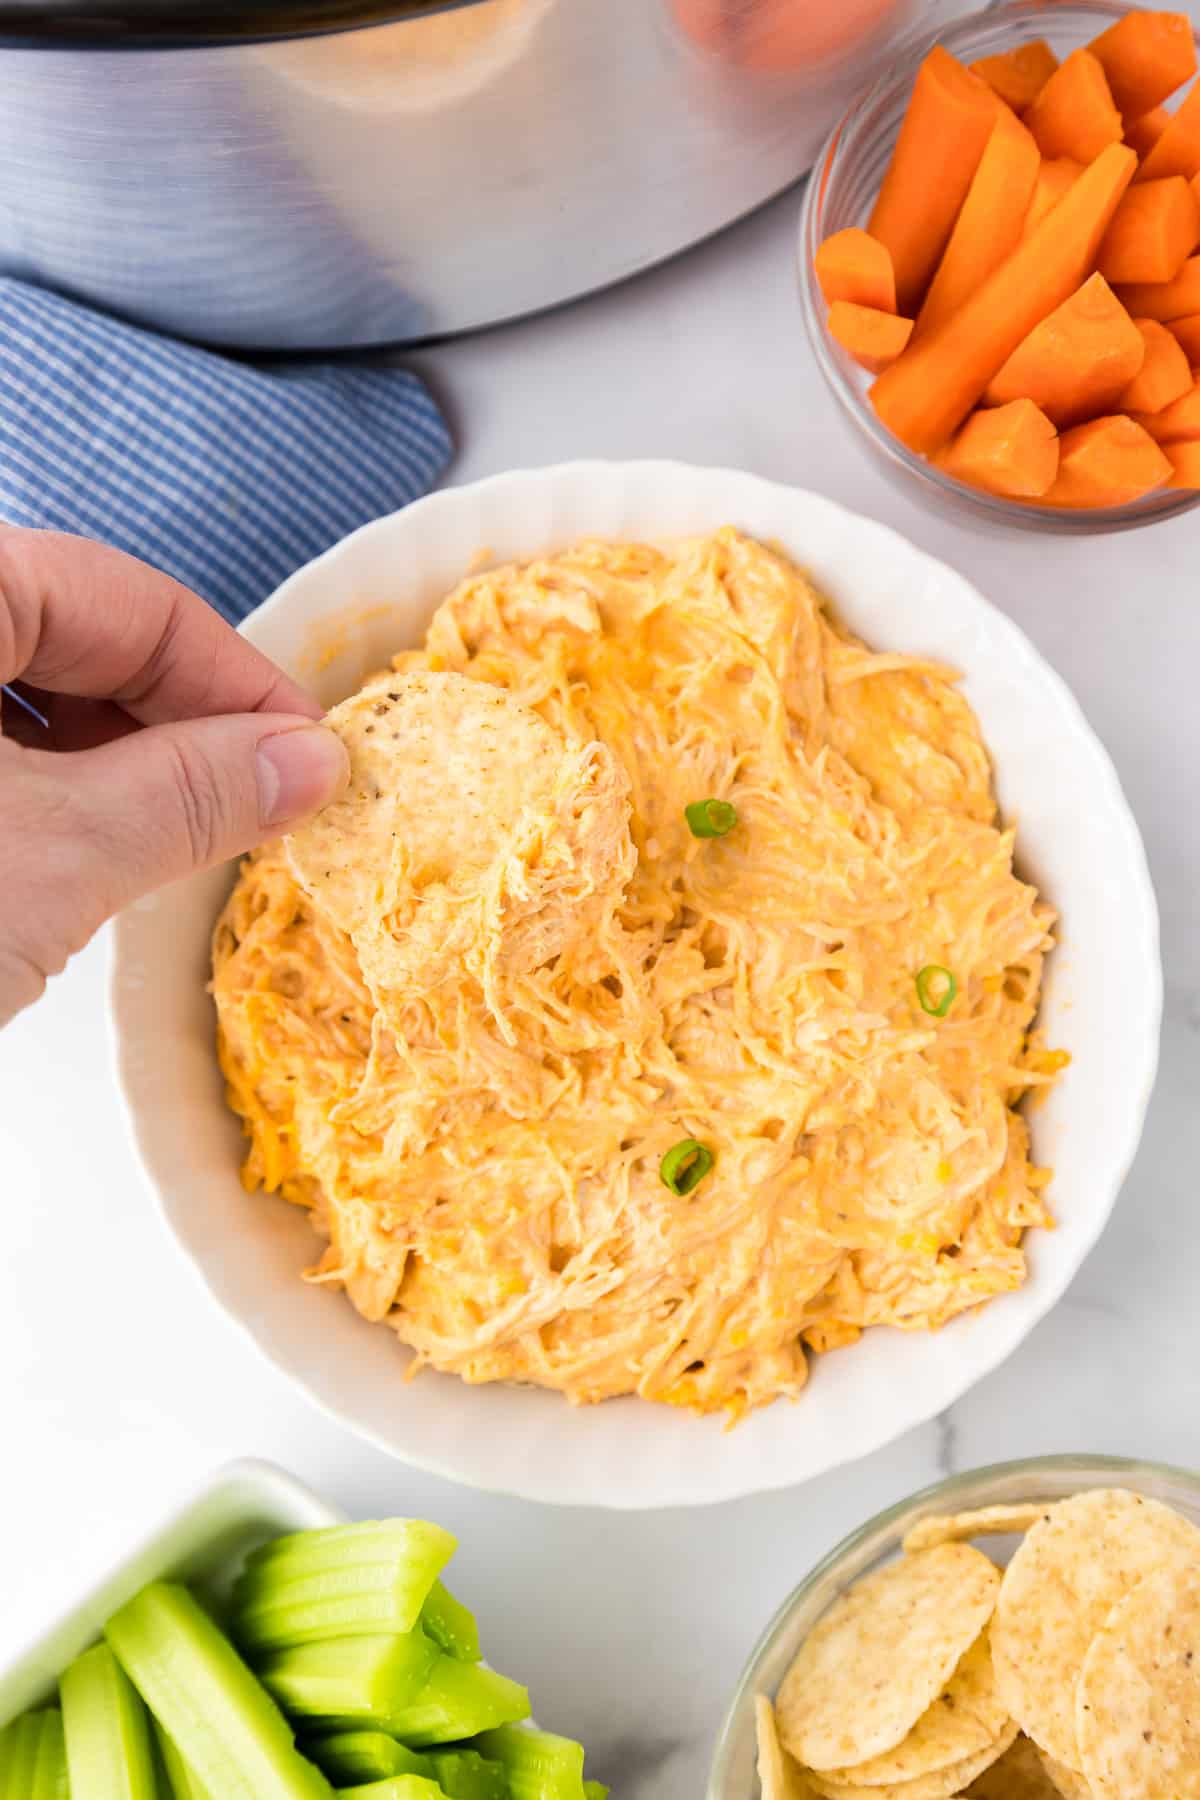 A person's hand dipping a chip into a bowl of buffalo chicken dip with more chips, carrots and celery in bowls nearby.